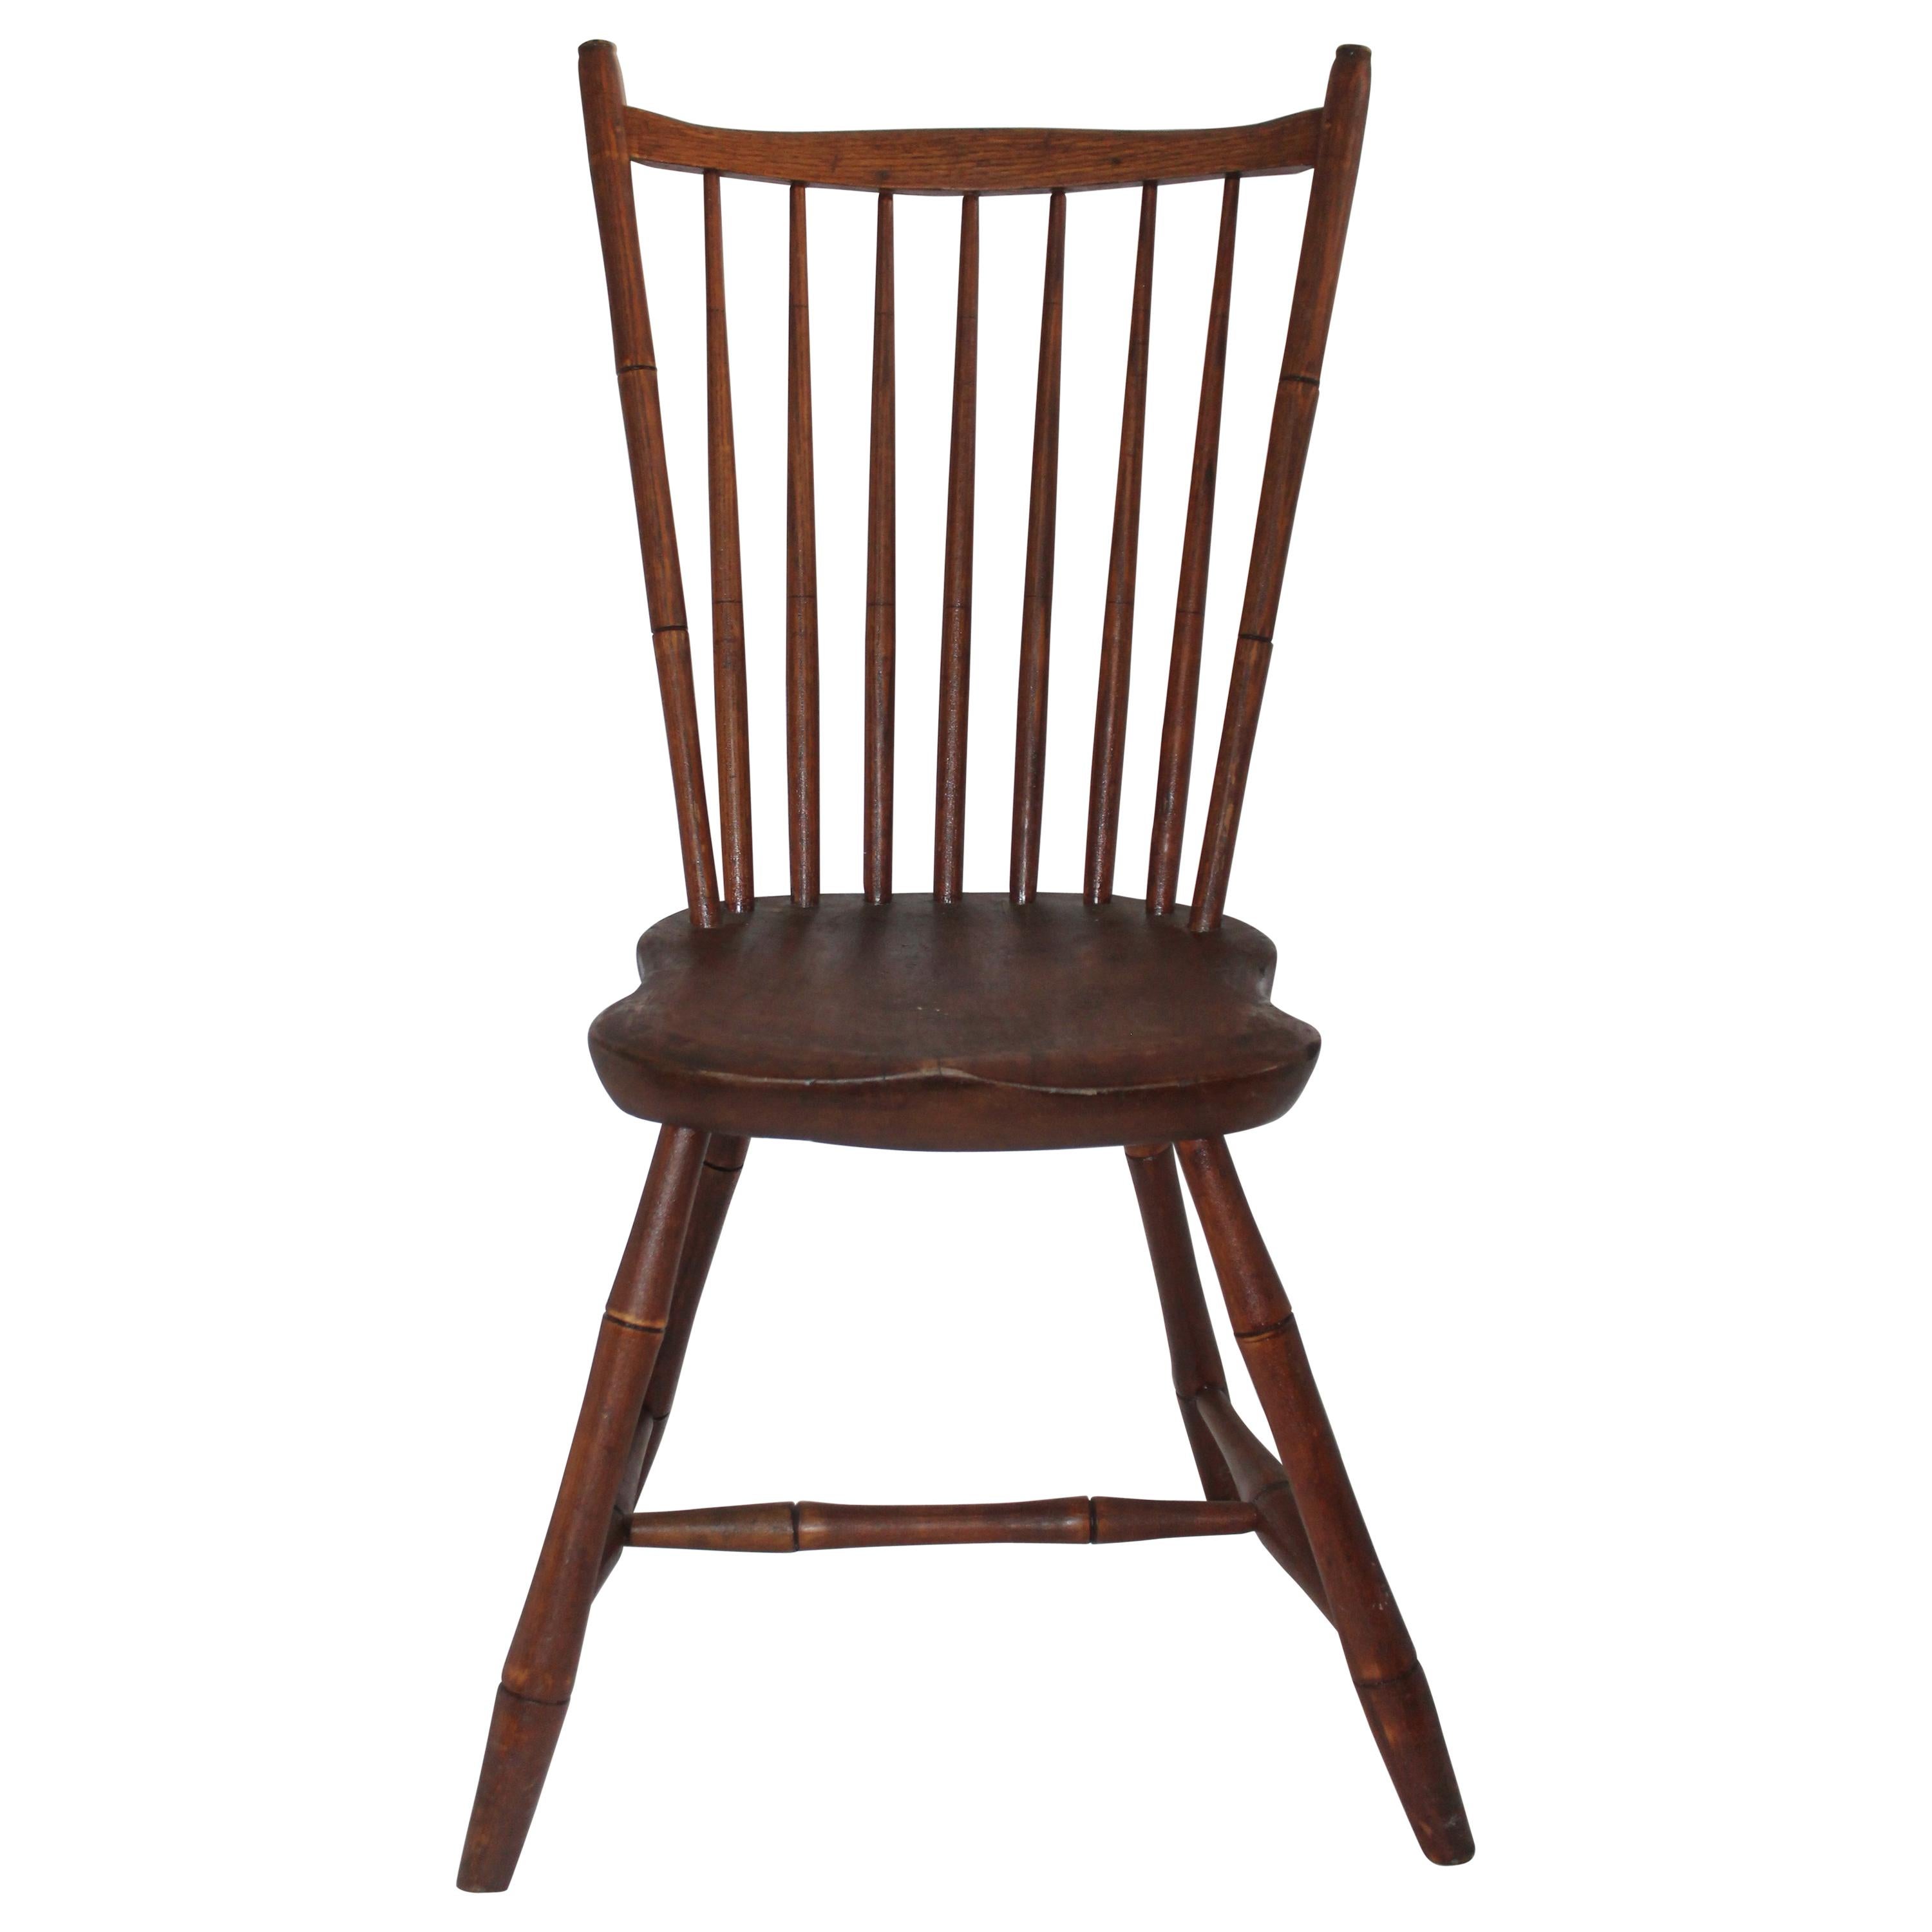 19th Century Rod Back Early Windsor Chair